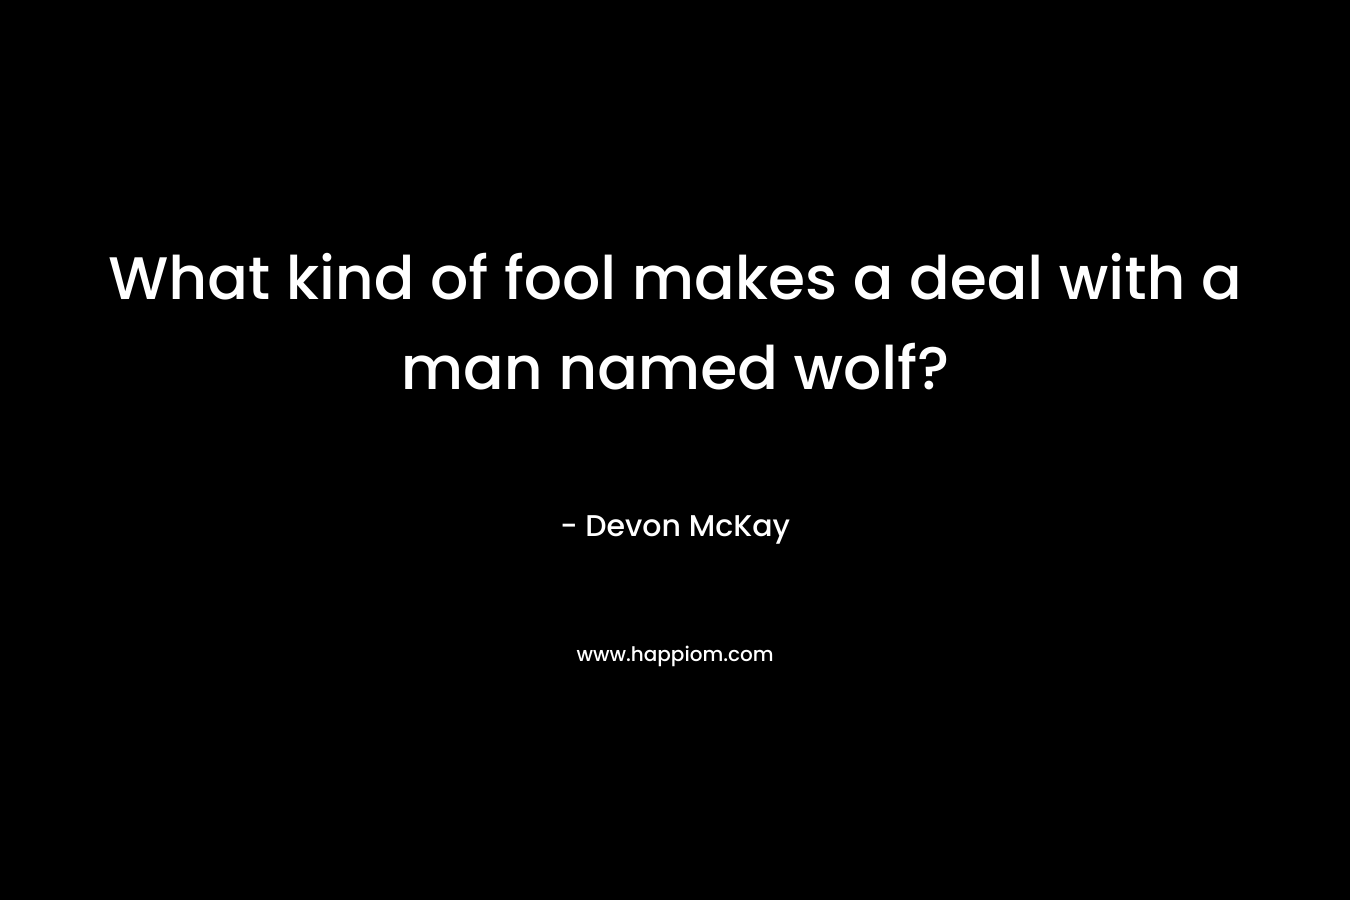 What kind of fool makes a deal with a man named wolf? – Devon McKay